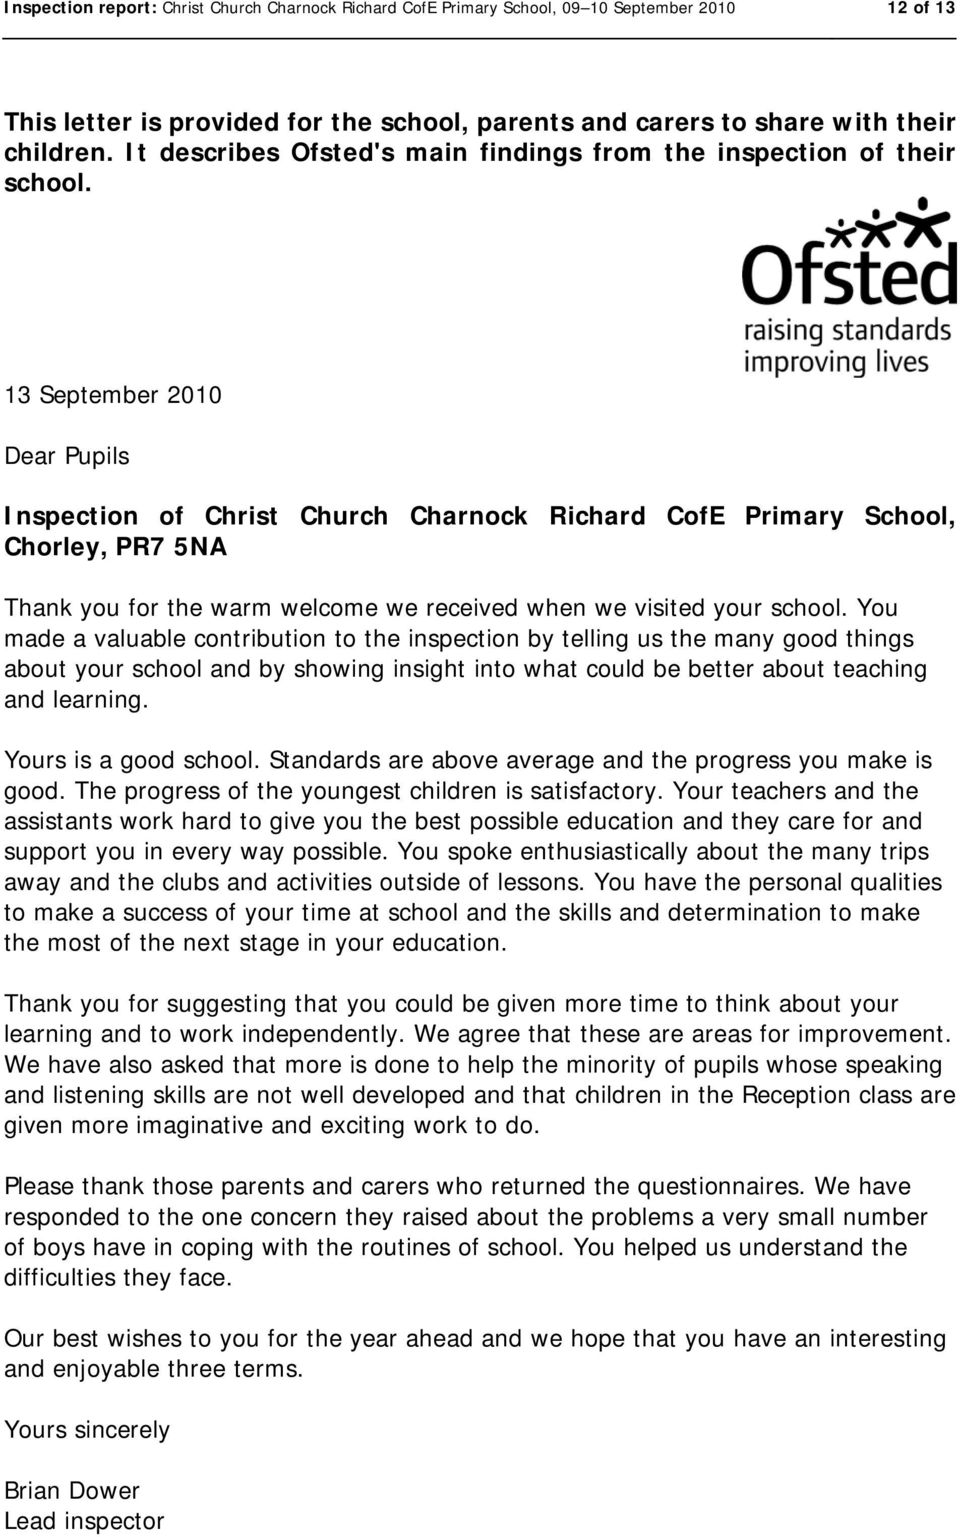 13 September 2010 Dear Pupils Inspection of Christ Church Charnock Richard CofE Primary School, Chorley, PR7 5NA Thank you for the warm welcome we received when we visited your school.